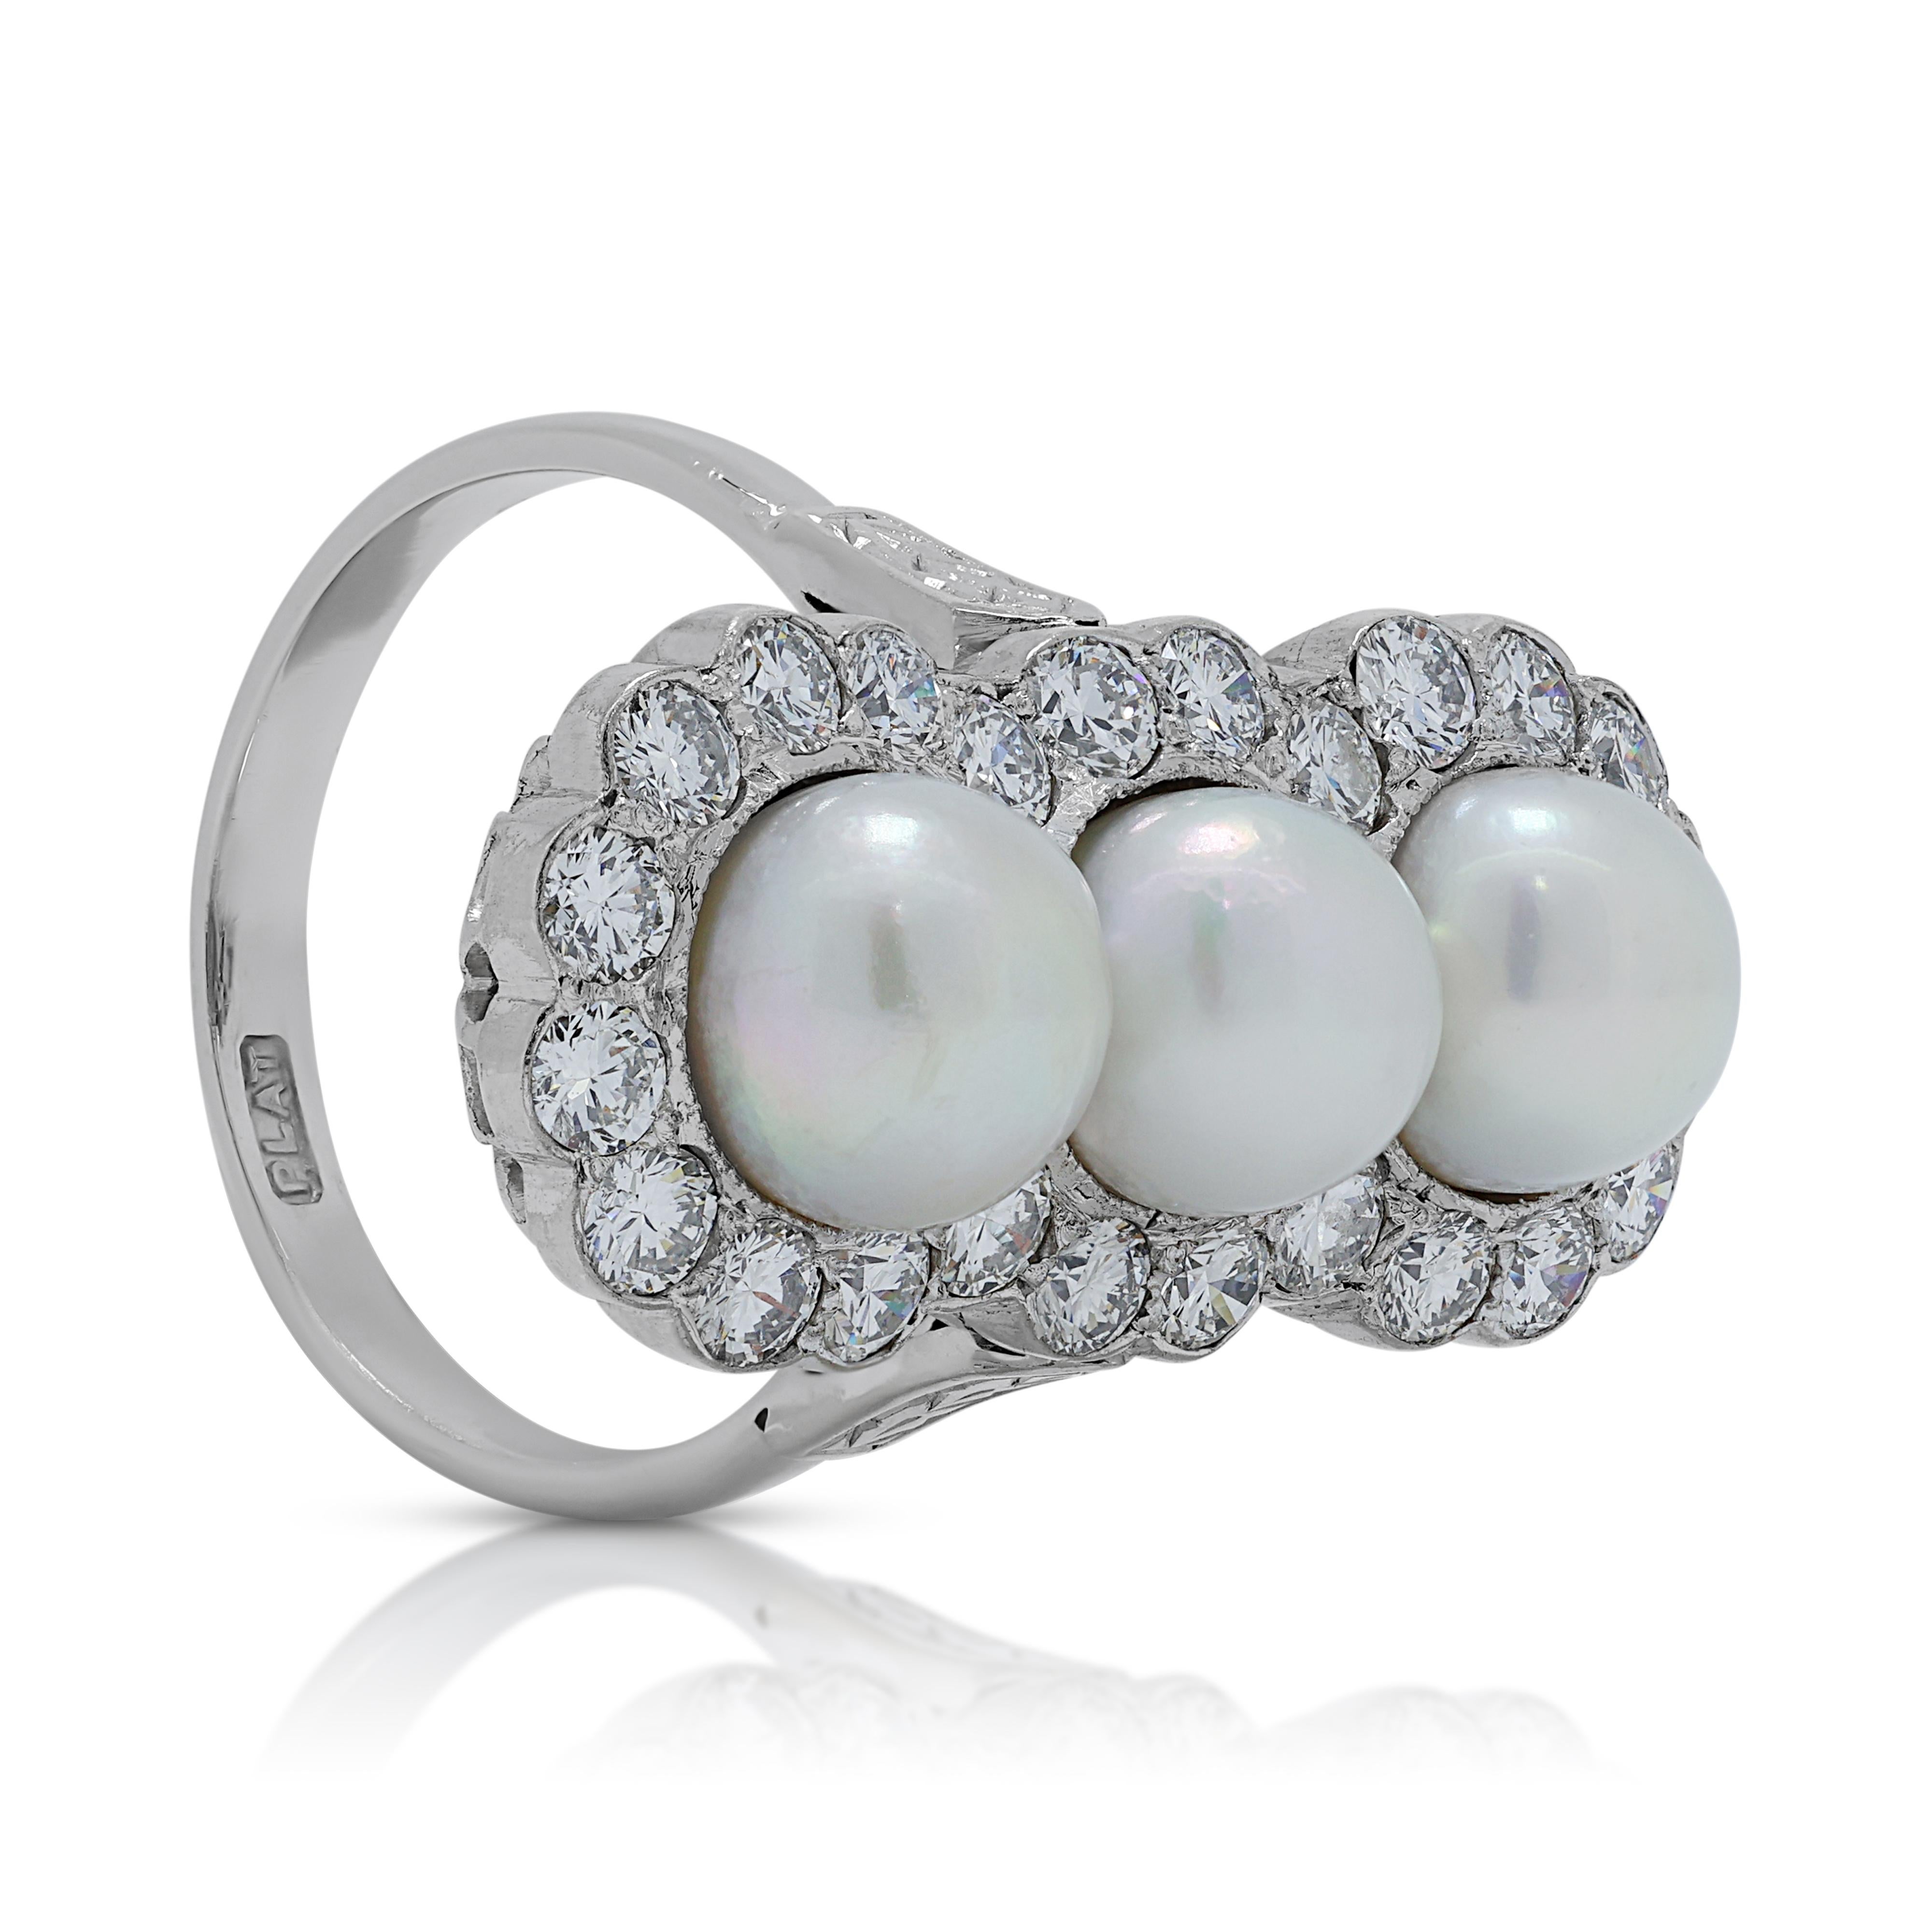 1.25ct Diamonds Ring with Pearls Set in Platinum In Excellent Condition For Sale In רמת גן, IL